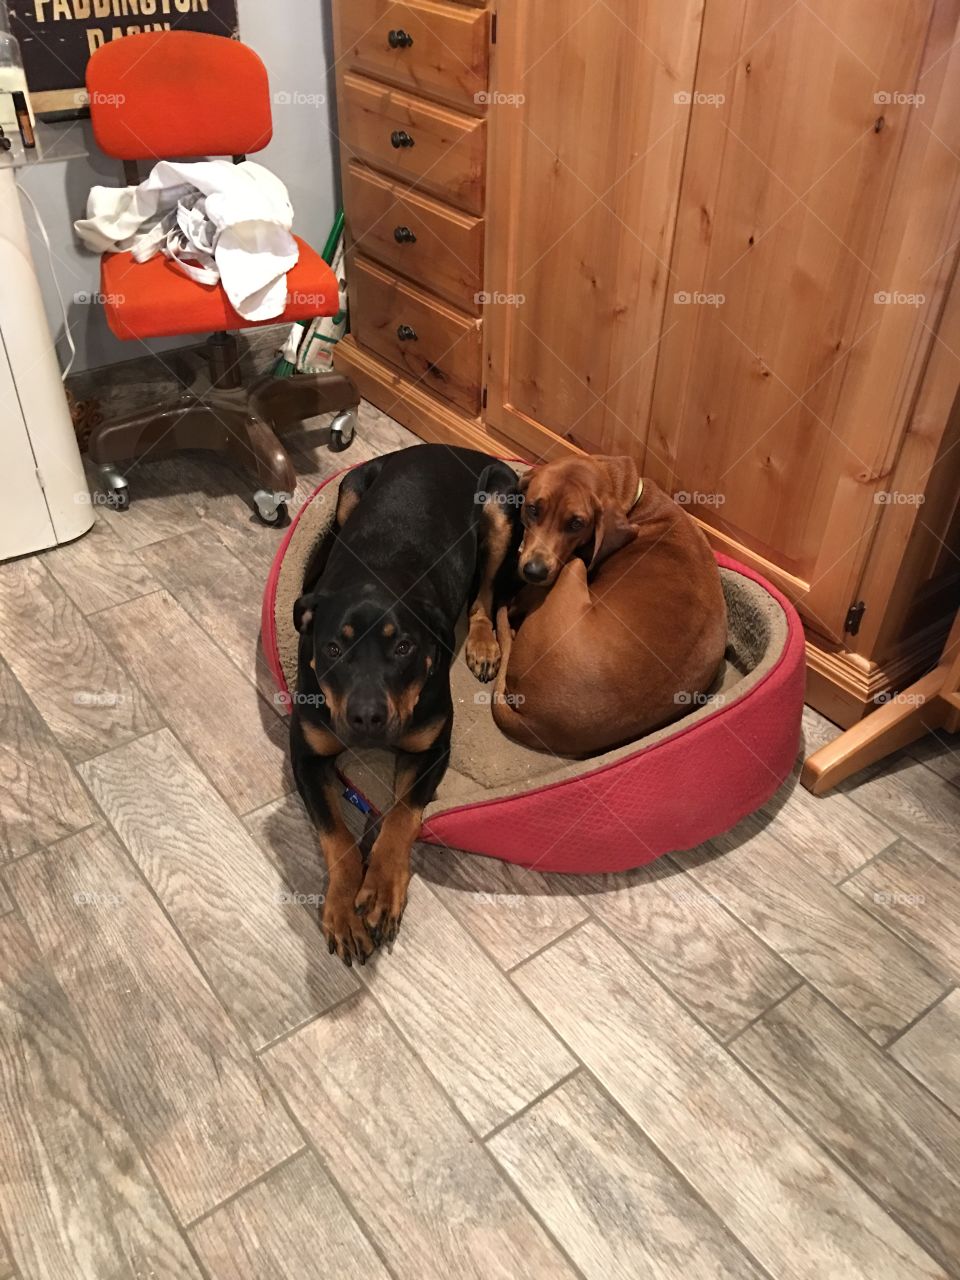 Coon hound and Rottweiler sharing a bed. 